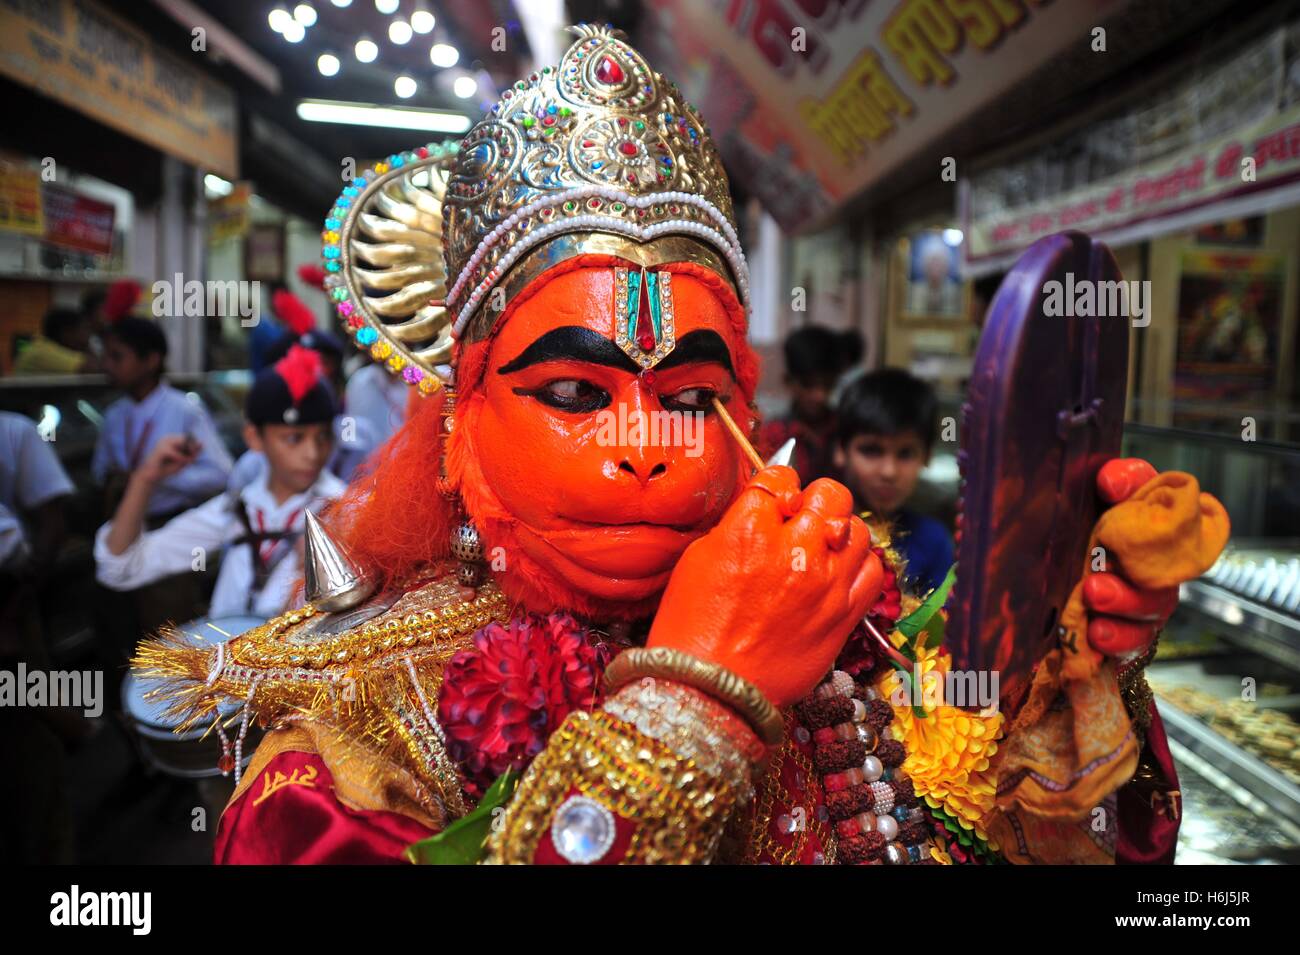 Allahabad, Uttar Pradesh, India. 29th Oct, 2016. An Artist getting made up as the monkey god Hanuman to take part in a religious procession on the occasion of Hanuman Jayanti in Allahabad. Hanuman Jayanti commemorates the birth of the Hindu God Haunman. © Prabhat Kumar Verma/ZUMA Wire/Alamy Live News Stock Photo